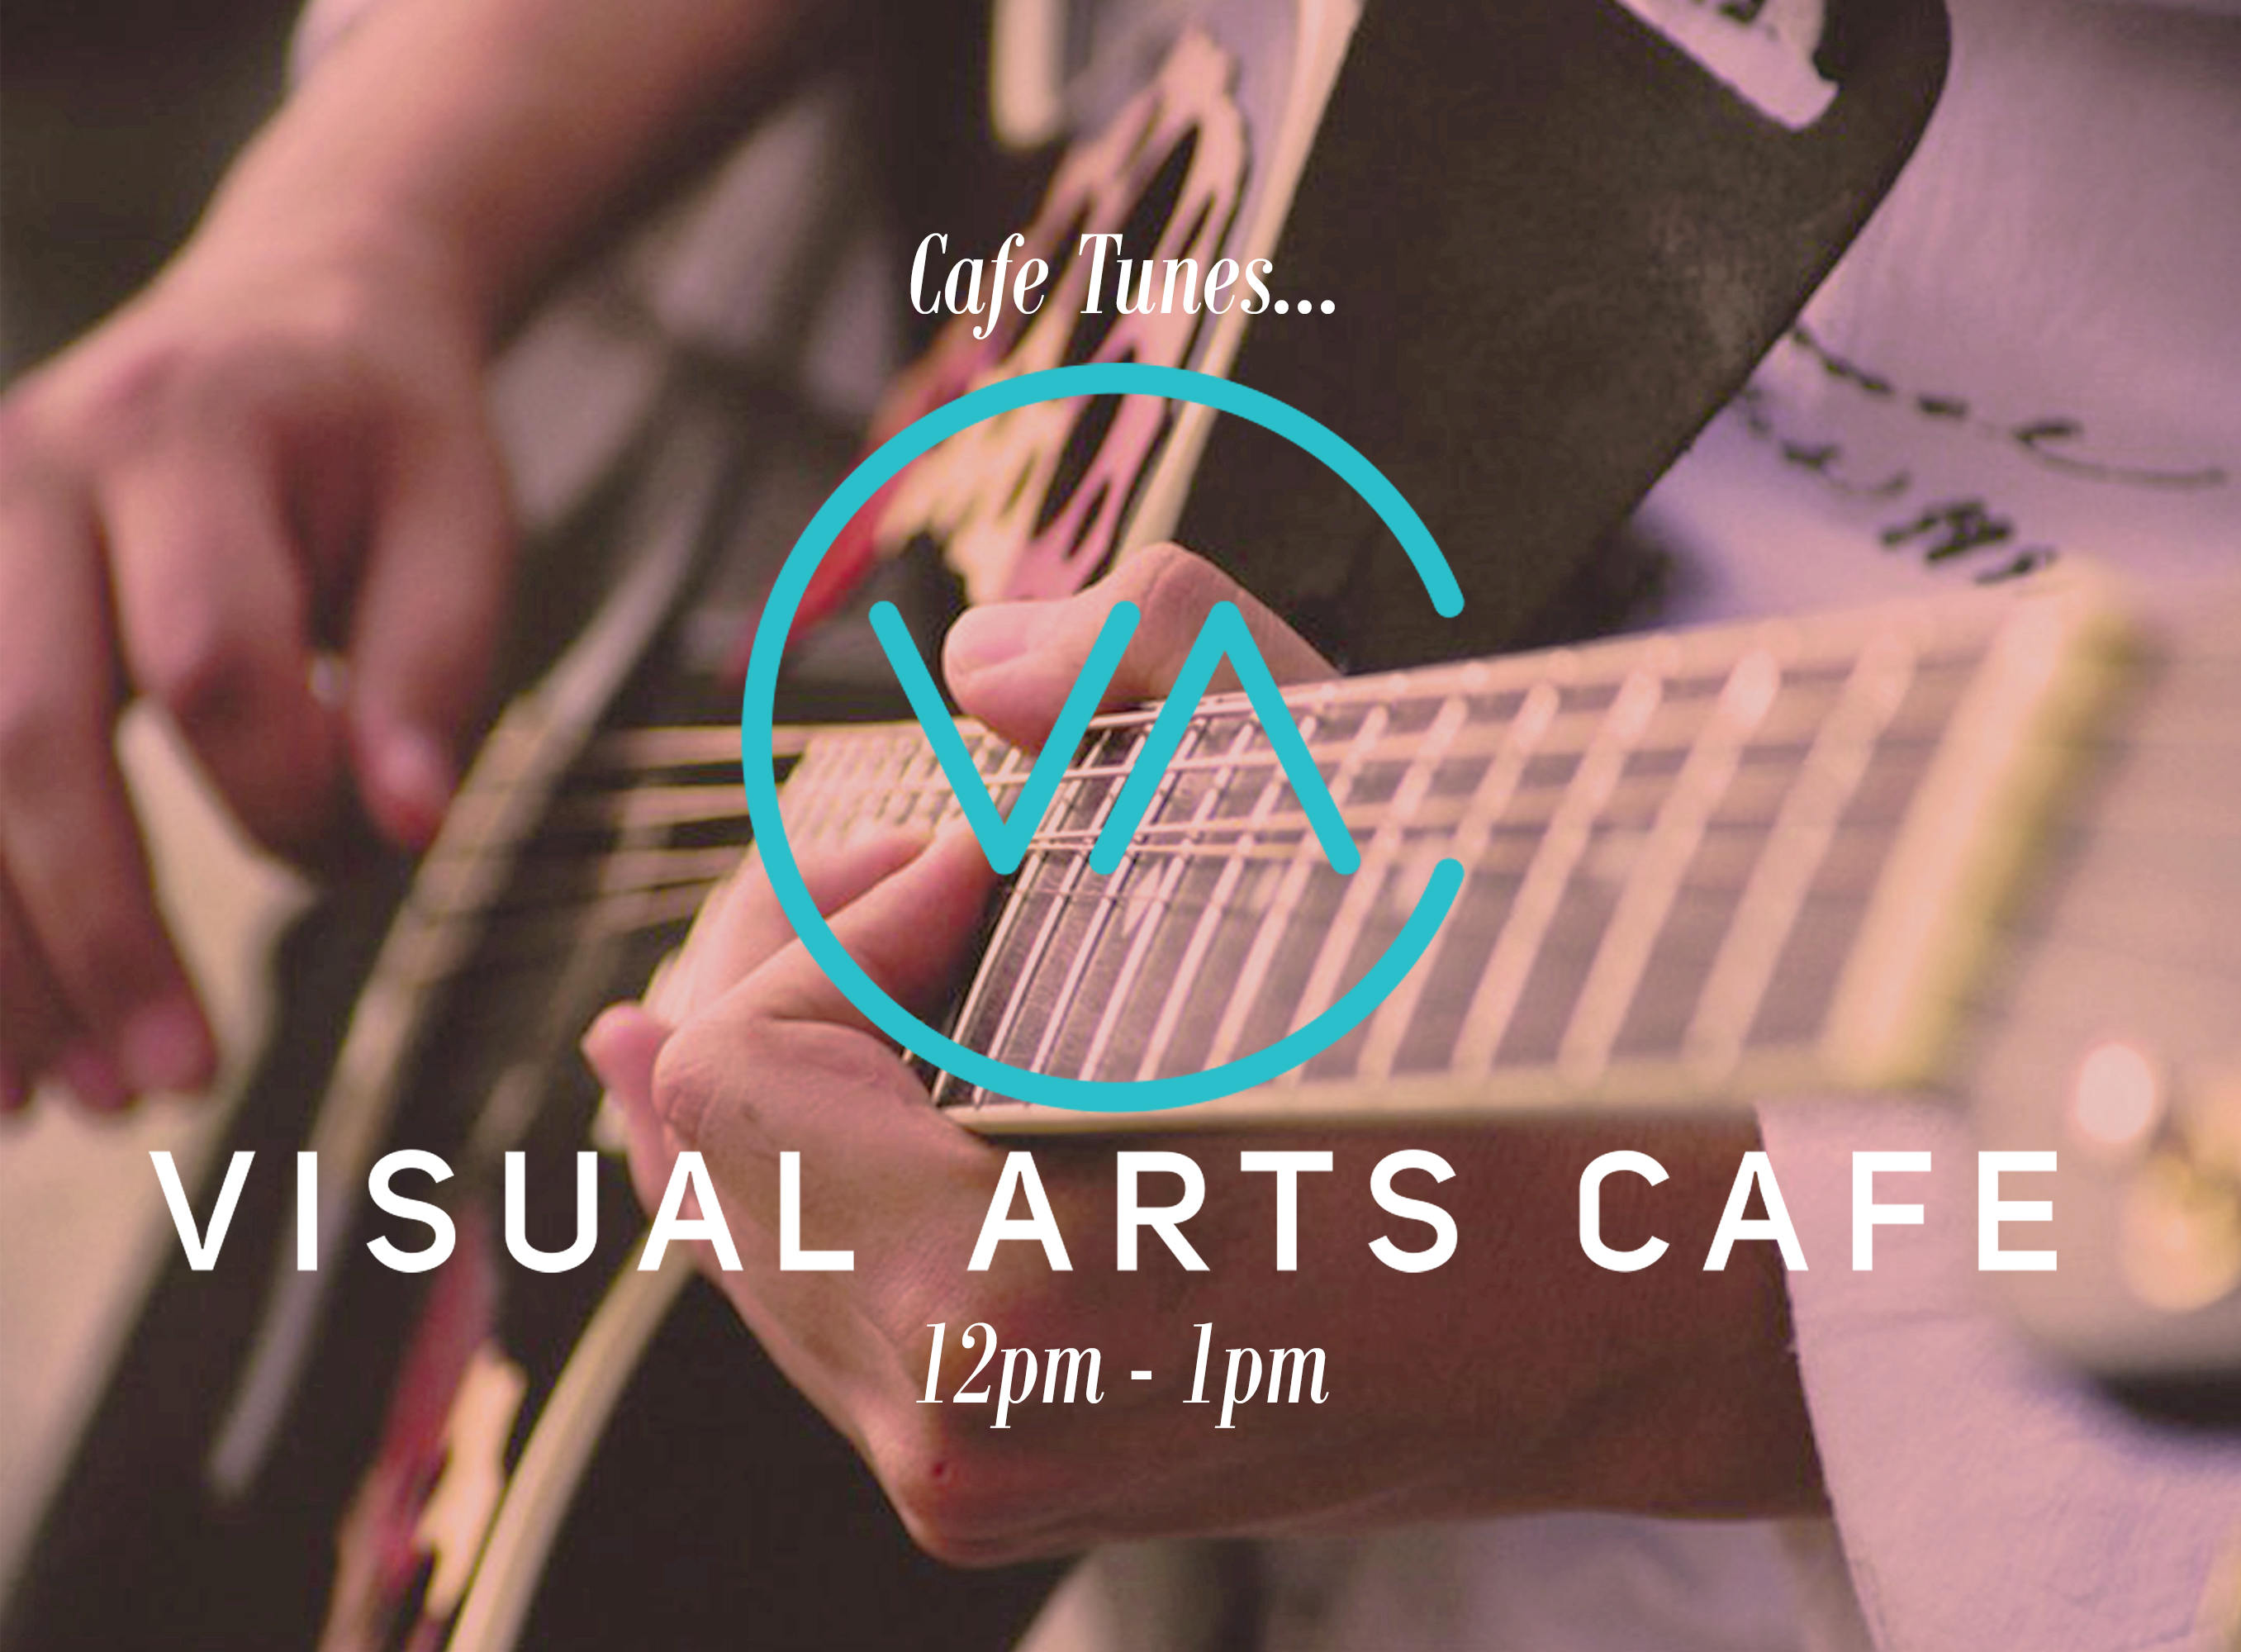 Cafe Tunes... Music at the Visual Arts Cafe